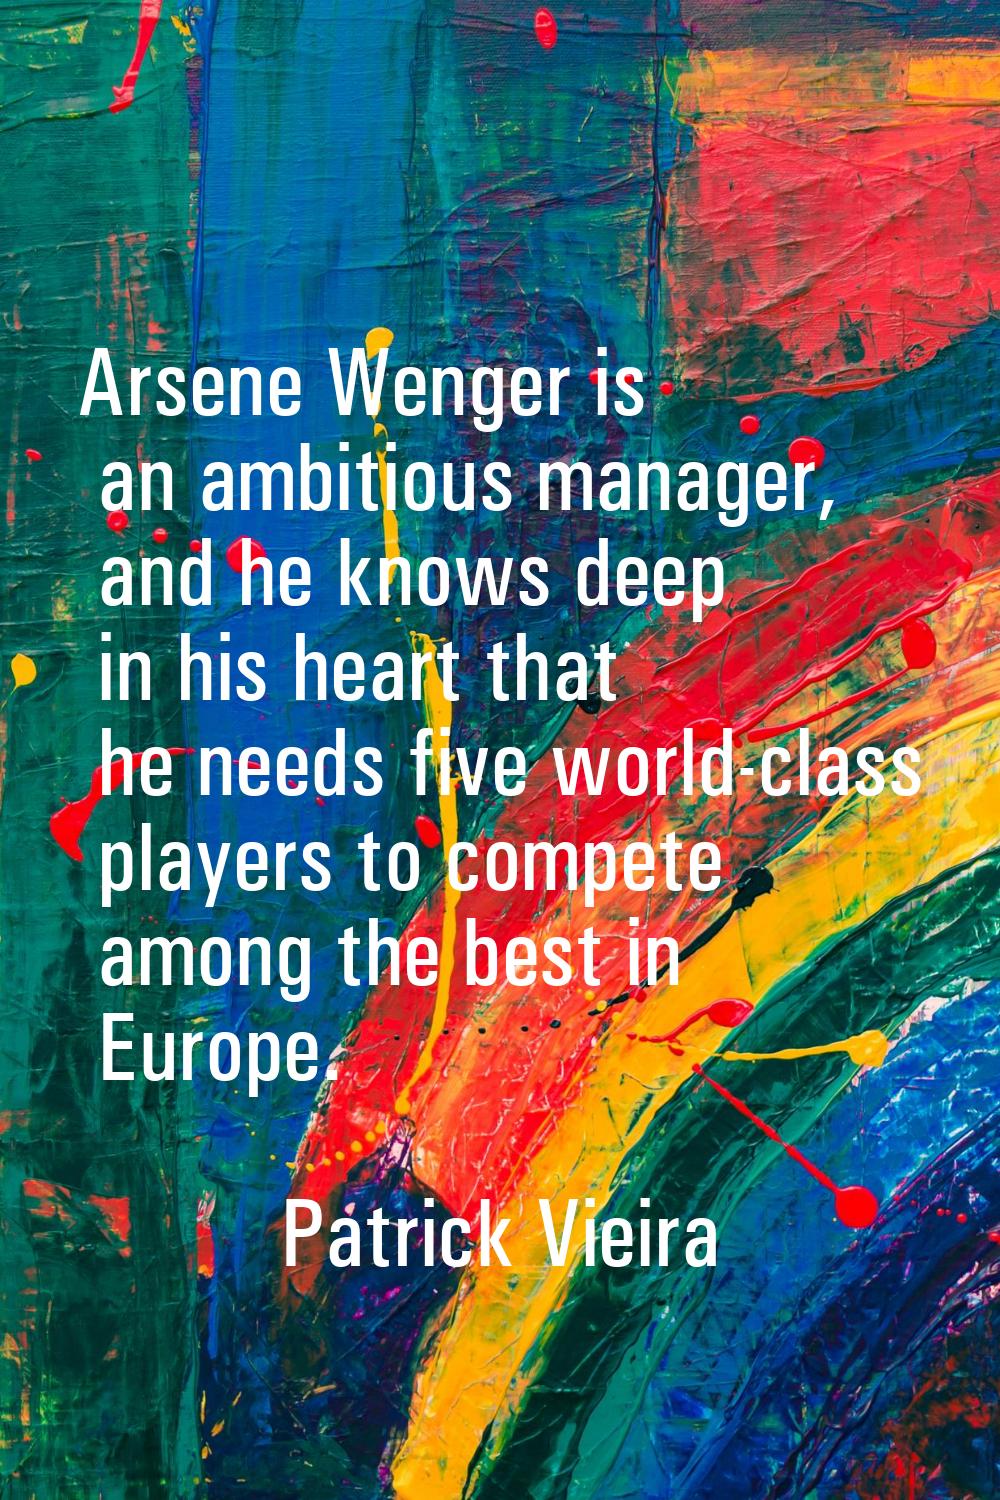 Arsene Wenger is an ambitious manager, and he knows deep in his heart that he needs five world-clas